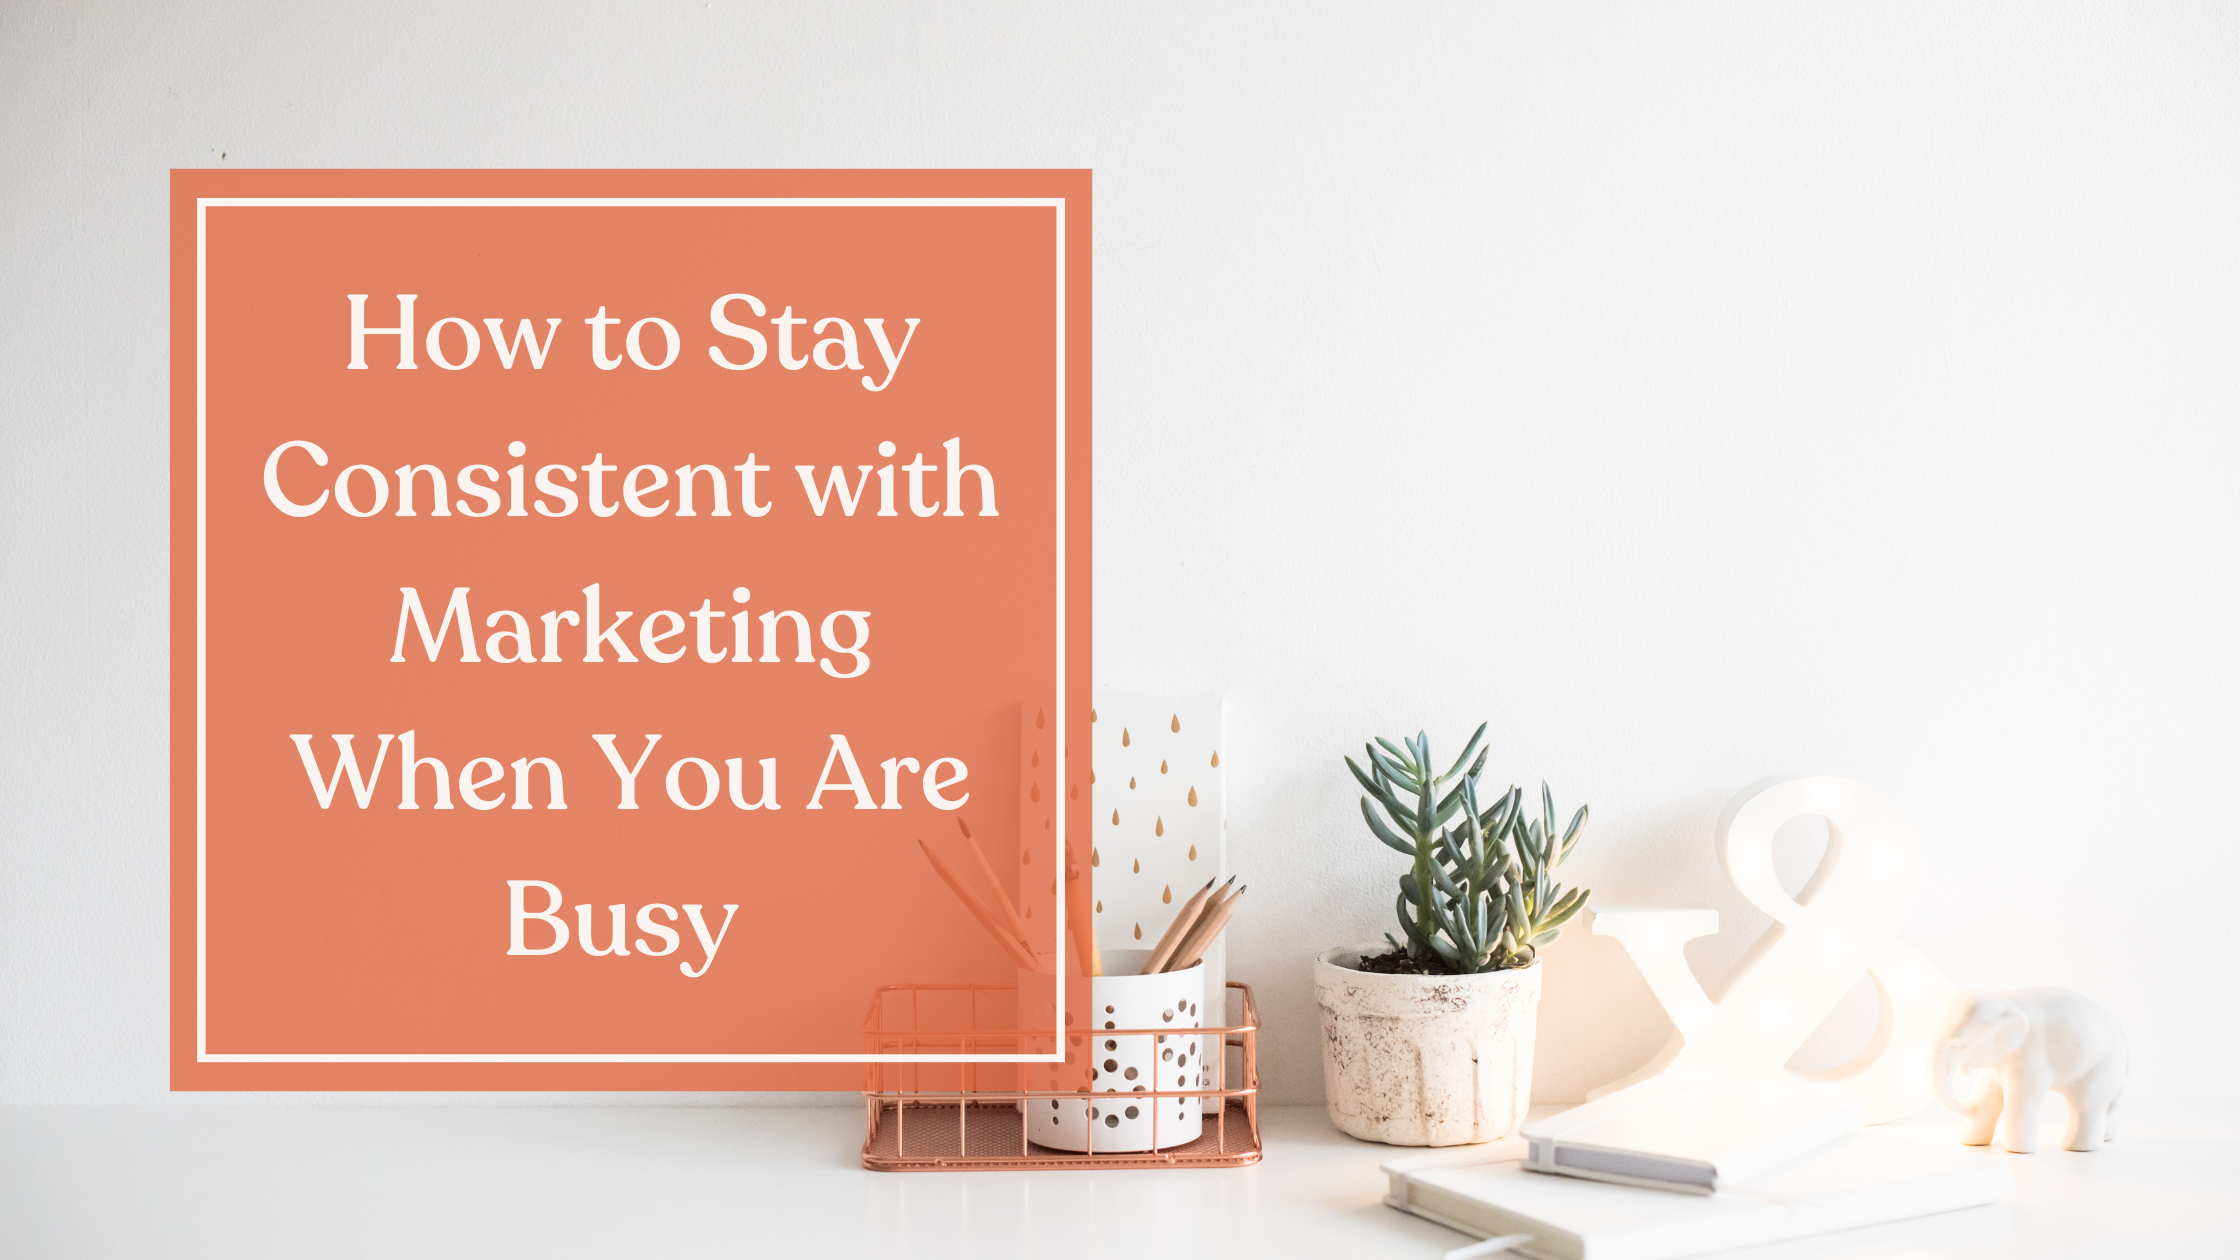 How to Stay Consistent with Marketing When You Are Busy